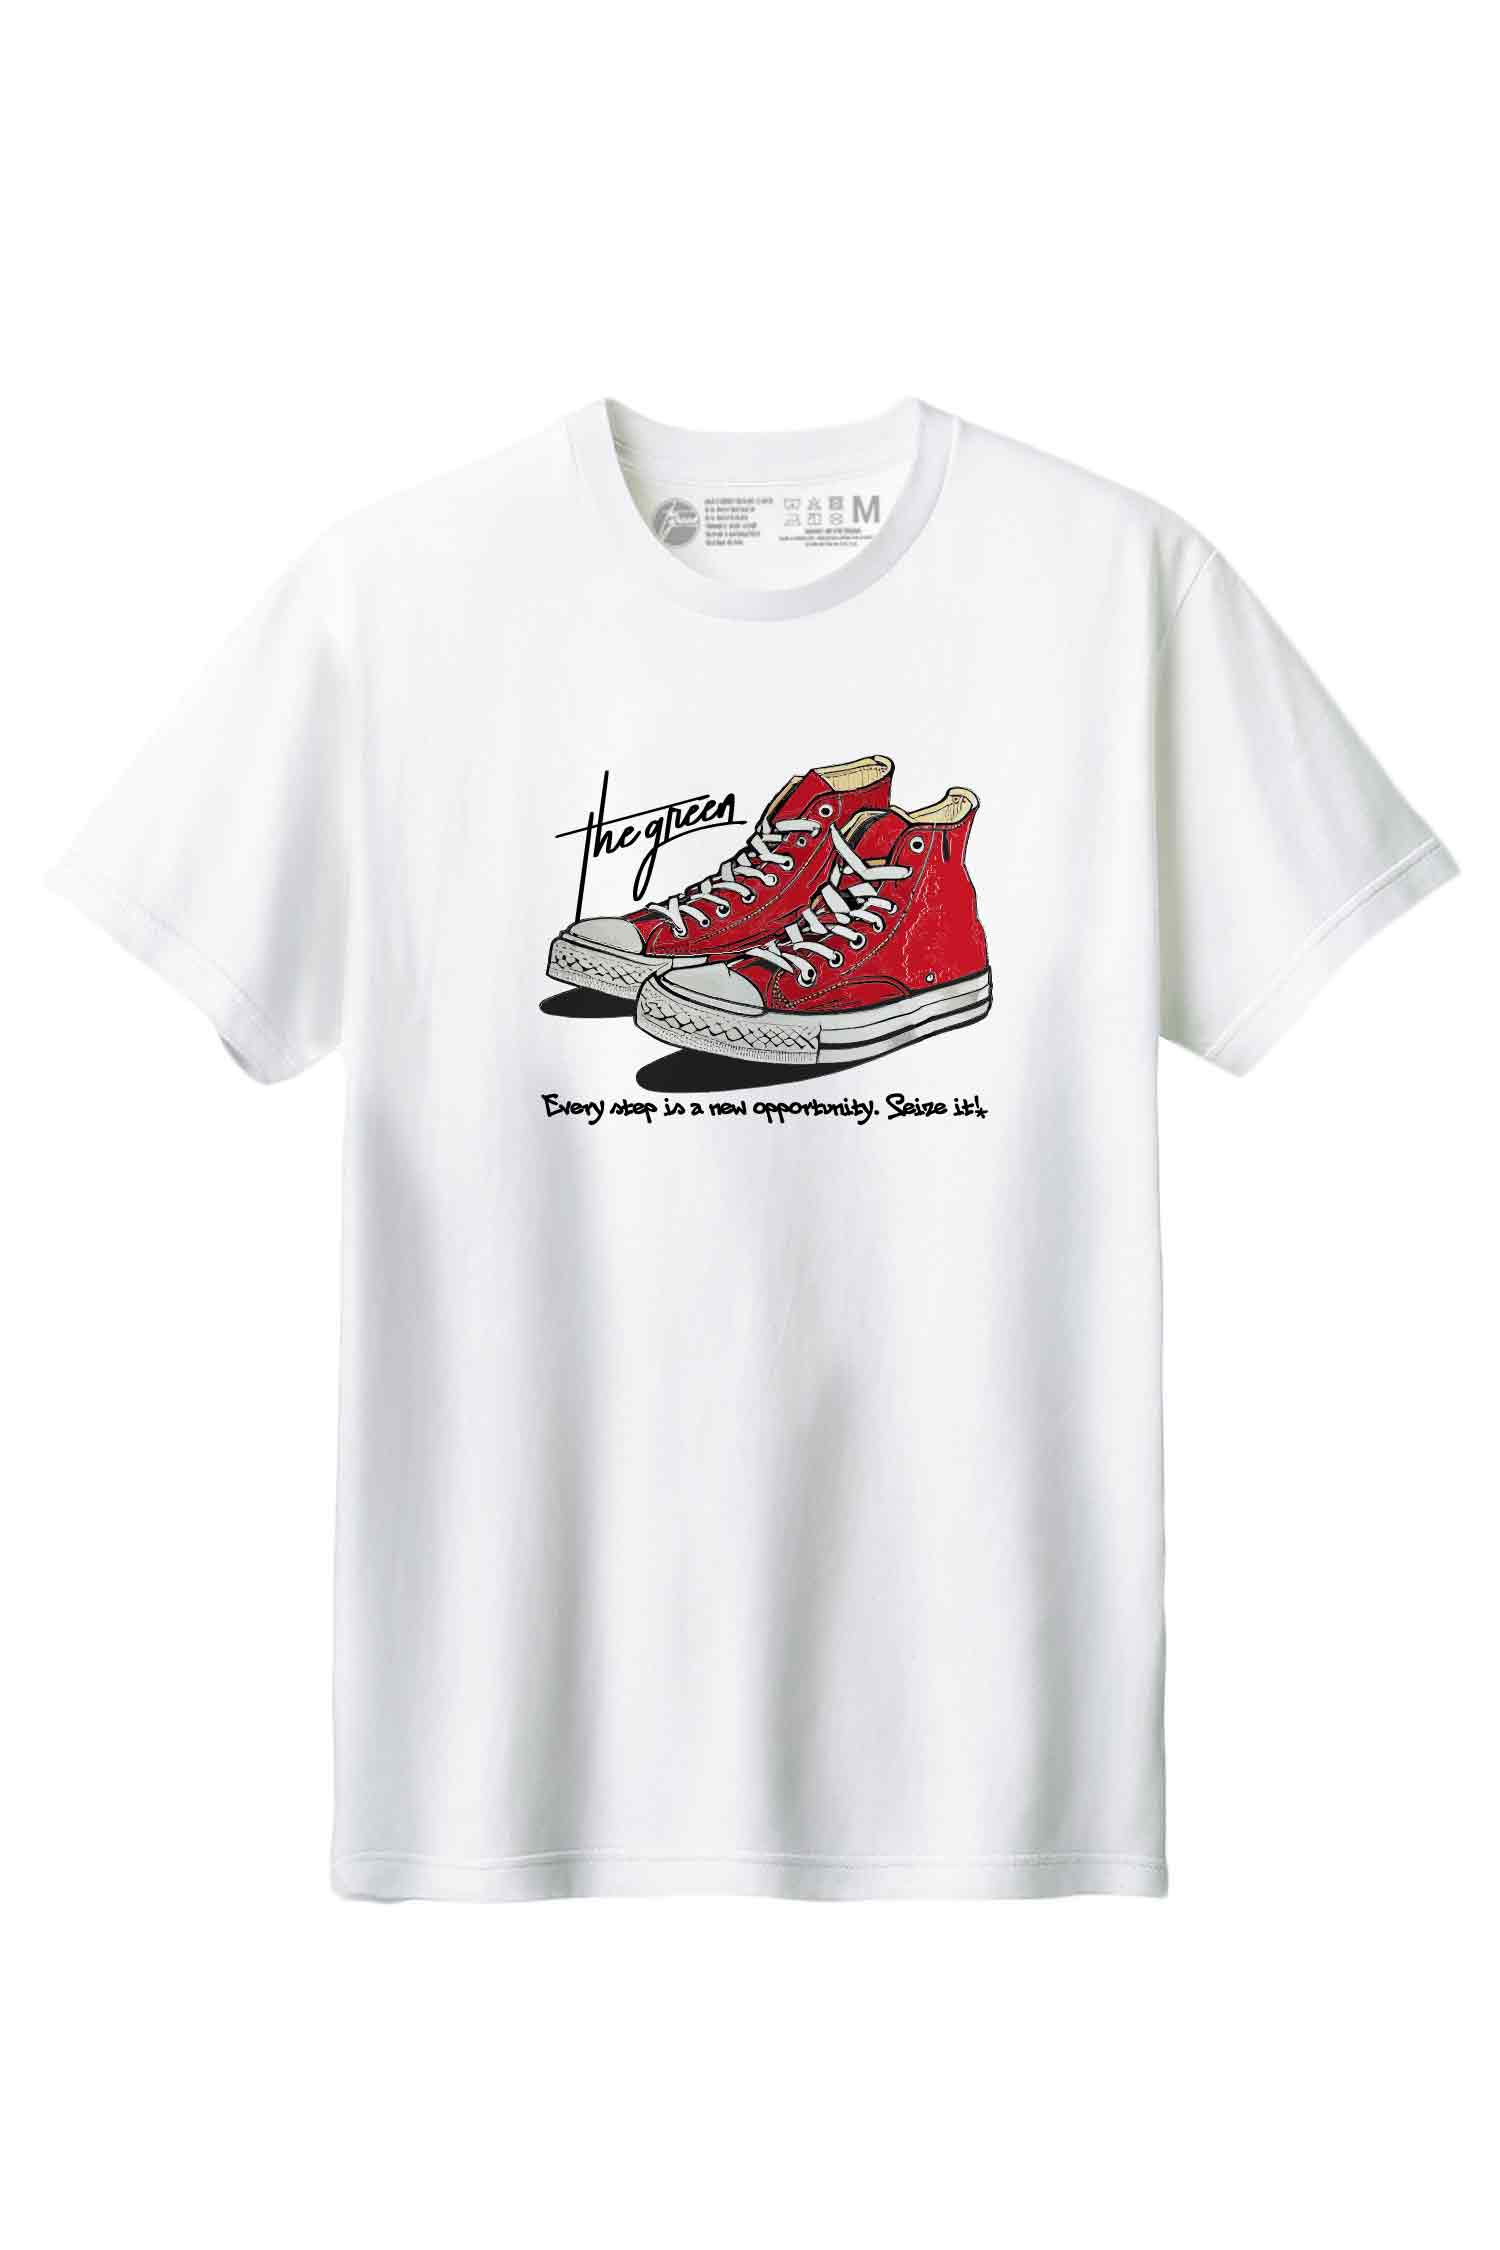 【THE GREEN】スタイリッシュな一枚！/ レッド・ハイカット・スニーカーTシャツ - Red High Cut Sneaker Tee  /cotton 100%/size:XS-XXL